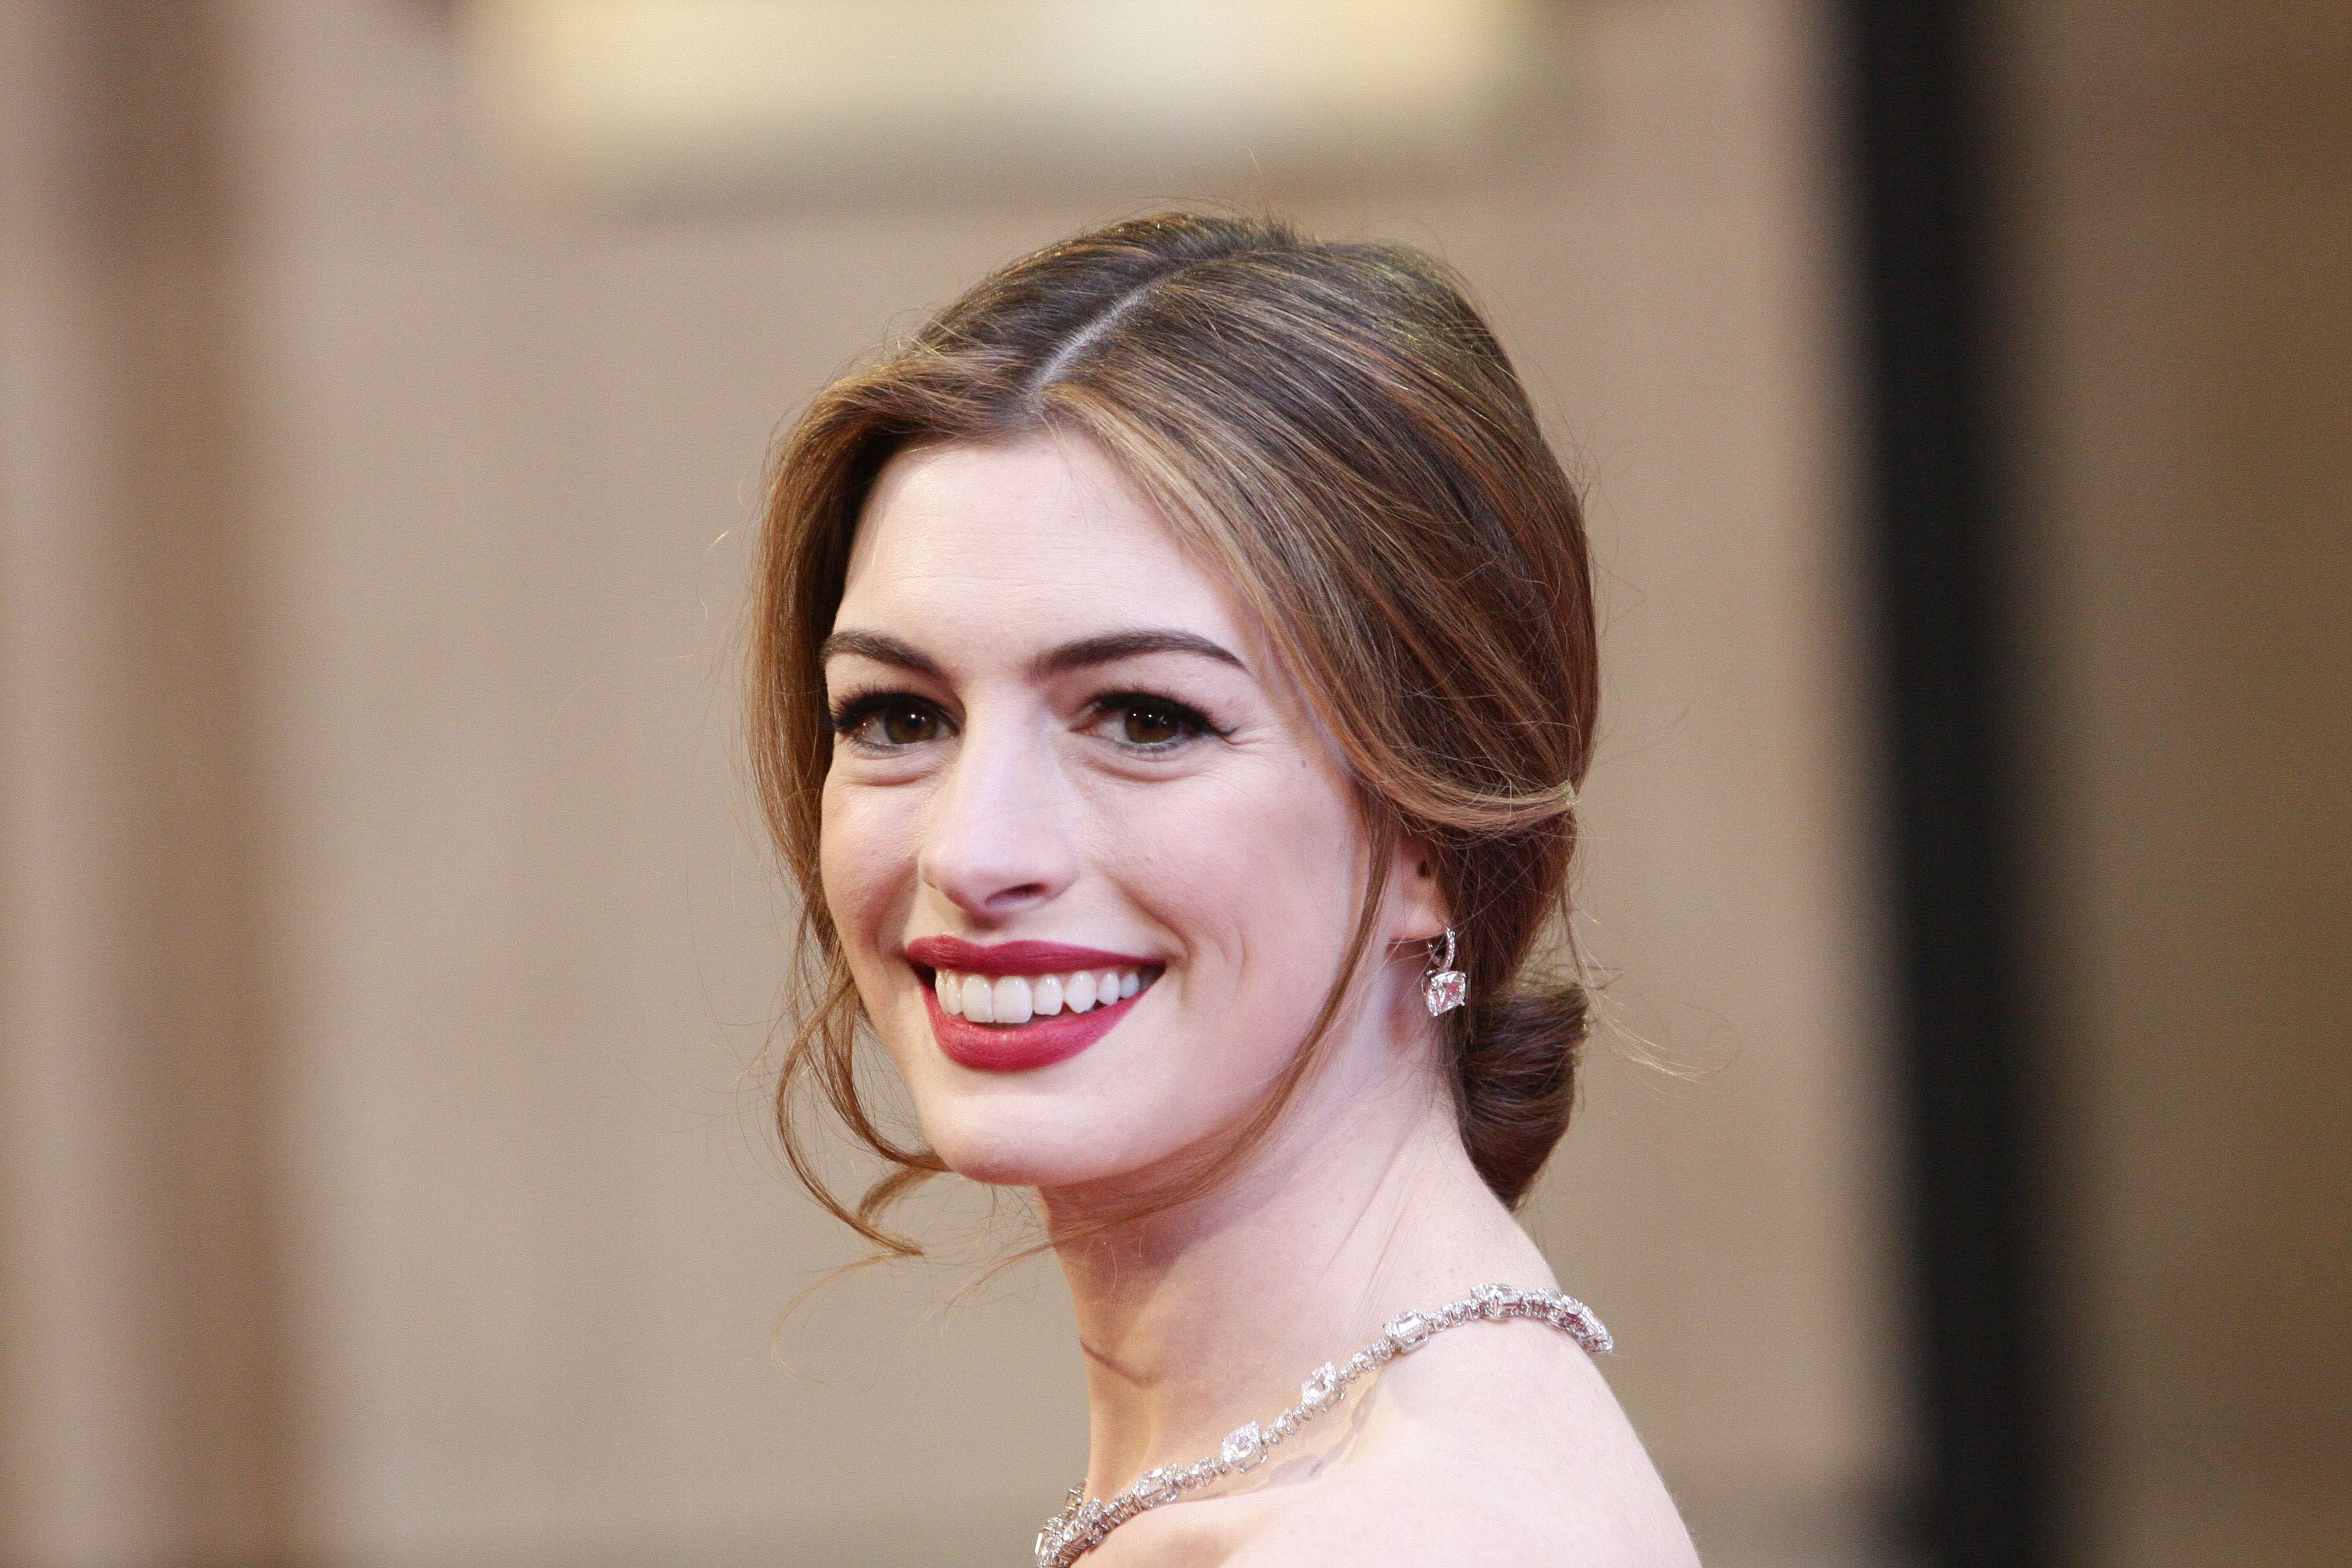 Anne Hathaway arriving at the 83rd Annual Academy Awards